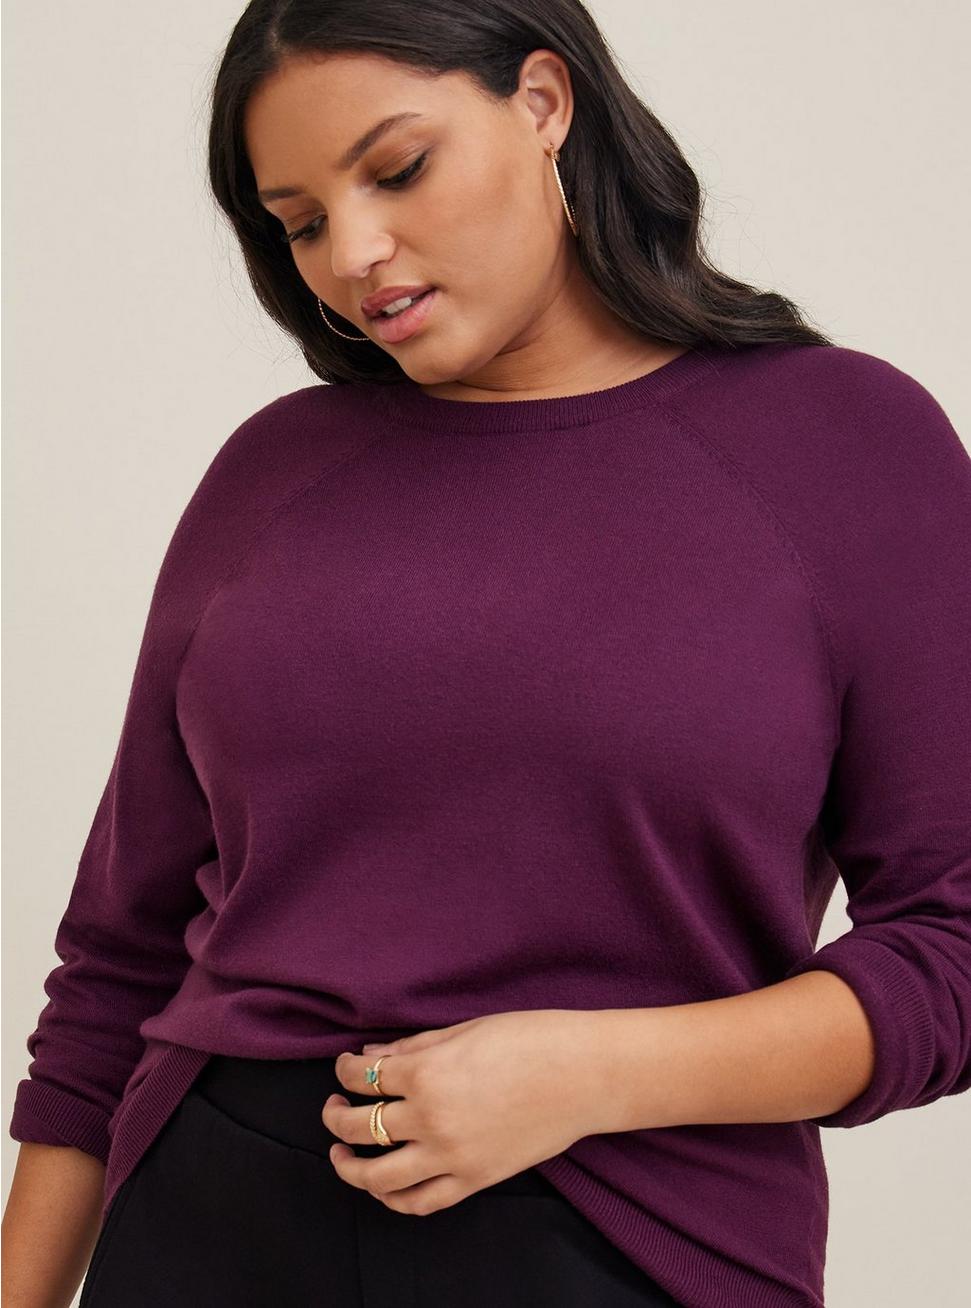 Everyday Soft Pullover Crew Sweater, PURPLE, hi-res